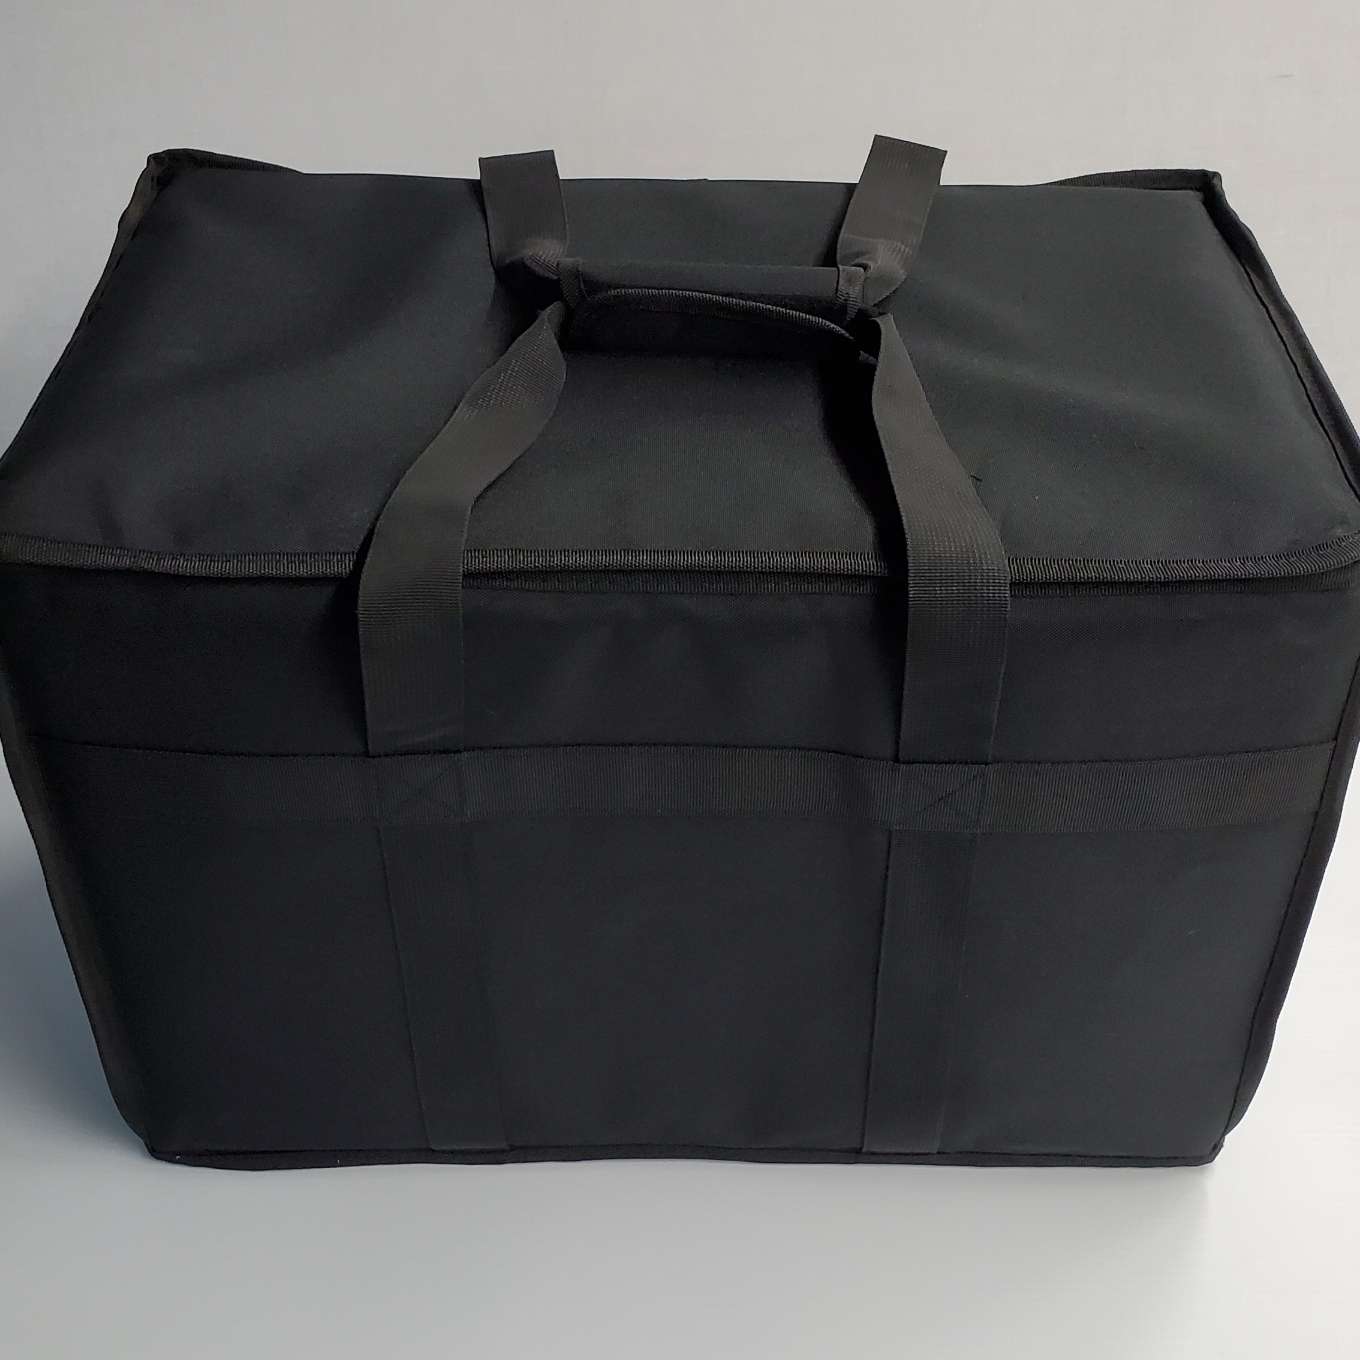 22” x 14” x 16” Food Delivery Bag 